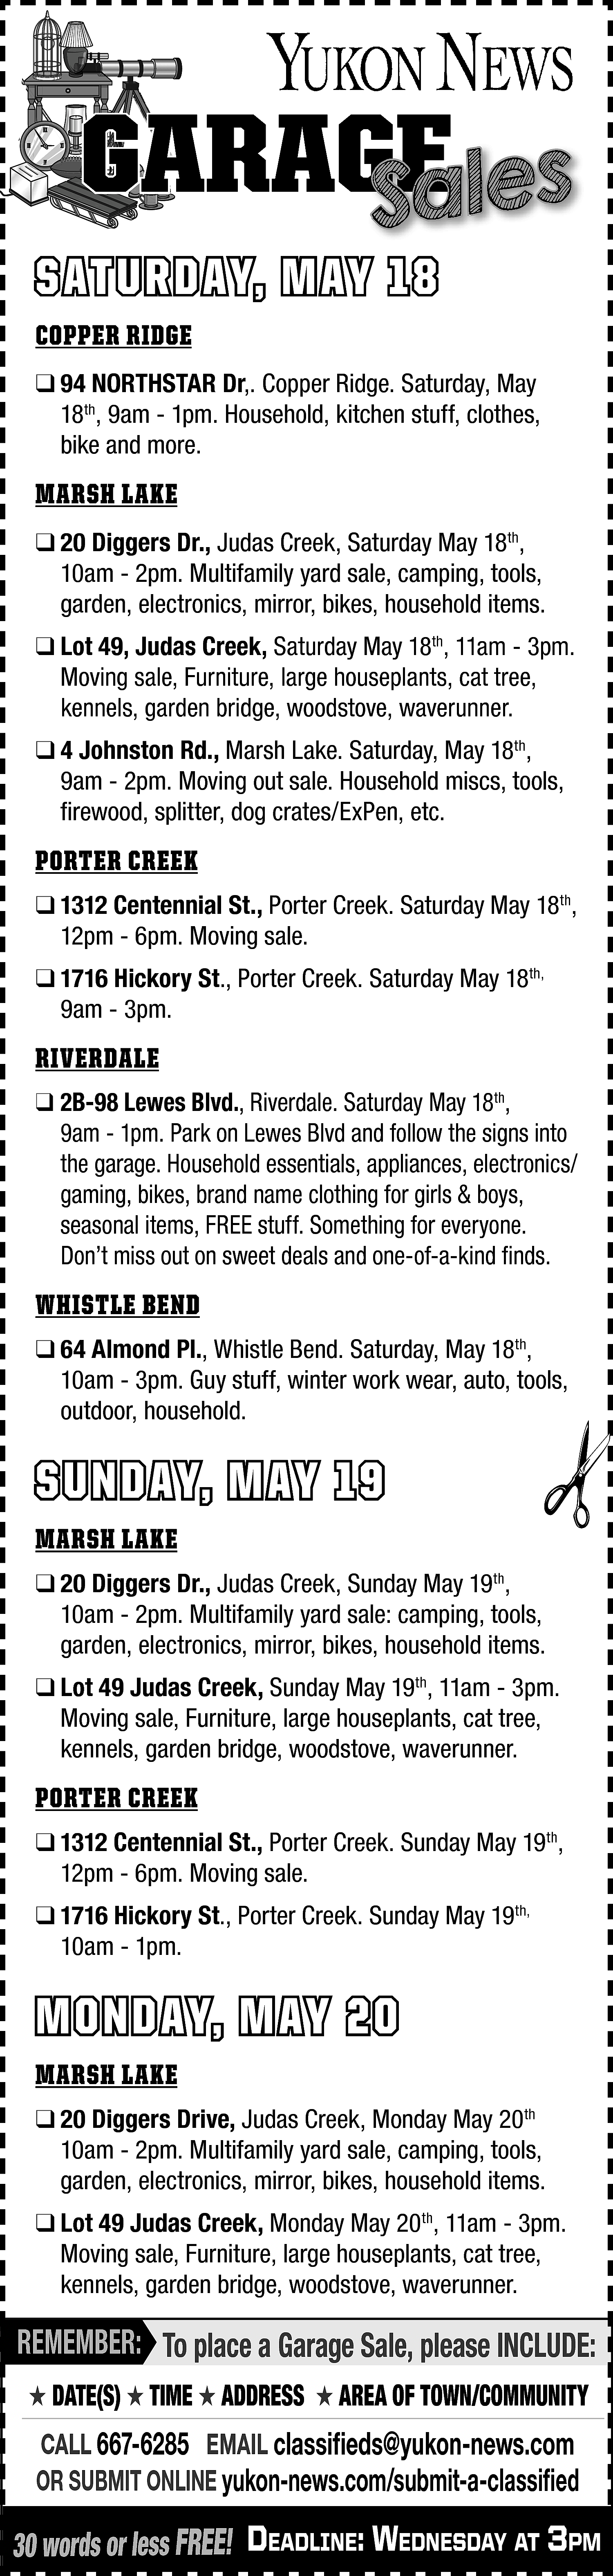 GARAGE <br>GE <br>Sales <br> <br>SATURDAY,  GARAGE  GE  Sales    SATURDAY, MAY 18  COPPER RIDGE    ❑ 94 NORTHSTAR Dr,. Copper Ridge. Saturday, May  18th, 9am - 1pm. Household, kitchen stuff, clothes,  bike and more.    MARSH LAKE  ❑ 20 Diggers Dr., Judas Creek, Saturday May 18th,  10am - 2pm. Multifamily yard sale, camping, tools,  garden, electronics, mirror, bikes, household items.  ❑ Lot 49, Judas Creek, Saturday May 18th, 11am - 3pm.  Moving sale, Furniture, large houseplants, cat tree,  kennels, garden bridge, woodstove, waverunner.  ❑ 4 Johnston Rd., Marsh Lake. Saturday, May 18th,  9am - 2pm. Moving out sale. Household miscs, tools,  firewood, splitter, dog crates/ExPen, etc.    PORTER CREEK  ❑ 1312 Centennial St., Porter Creek. Saturday May 18th,  12pm - 6pm. Moving sale.  ❑ 1716 Hickory St., Porter Creek. Saturday May 18th,  9am - 3pm.    RIVERDALE  ❑ 2B-98 Lewes Blvd., Riverdale. Saturday May 18th,  9am - 1pm. Park on Lewes Blvd and follow the signs into  the garage. Household essentials, appliances, electronics/  gaming, bikes, brand name clothing for girls & boys,  seasonal items, FREE stuff. Something for everyone.  Don’t miss out on sweet deals and one-of-a-kind finds.    WHISTLE BEND  ❑ 64 Almond Pl., Whistle Bend. Saturday, May 18th,  10am - 3pm. Guy stuff, winter work wear, auto, tools,  outdoor, household.    SUNDAY, MAY 19  MARSH LAKE  ❑ 20 Diggers Dr., Judas Creek, Sunday May 19th,  10am - 2pm. Multifamily yard sale: camping, tools,  garden, electronics, mirror, bikes, household items.  ❑ Lot 49 Judas Creek, Sunday May 19th, 11am - 3pm.  Moving sale, Furniture, large houseplants, cat tree,  kennels, garden bridge, woodstove, waverunner.    PORTER CREEK  ❑ 1312 Centennial St., Porter Creek. Sunday May 19th,  12pm - 6pm. Moving sale.  ❑ 1716 Hickory St., Porter Creek. Sunday May 19th,  10am - 1pm.    MONDAY, MAY 20  MARSH LAKE  ❑ 20 Diggers Drive, Judas Creek, Monday May 20th  10am - 2pm. Multifamily yard sale, camping, tools,  garden, electronics, mirror, bikes, household items.  ❑ Lot 49 Judas Creek, Monday May 20th, 11am - 3pm.  Moving sale, Furniture, large houseplants, cat tree,  kennels, garden bridge, woodstove, waverunner.    REMEMBER: To place a Garage Sale, please INCLUDE:  ★ DATE(S) ★ TIME ★ ADDRESS ★ AREA OF TOWN/COMMUNITY    CALL 667-6285 EMAIL classifieds@yukon-news.com  OR SUBMIT ONLINE yukon-news.com/submit-a-classified    30 words or less FREE! DeaDline: WeDnesDay at 3pm    